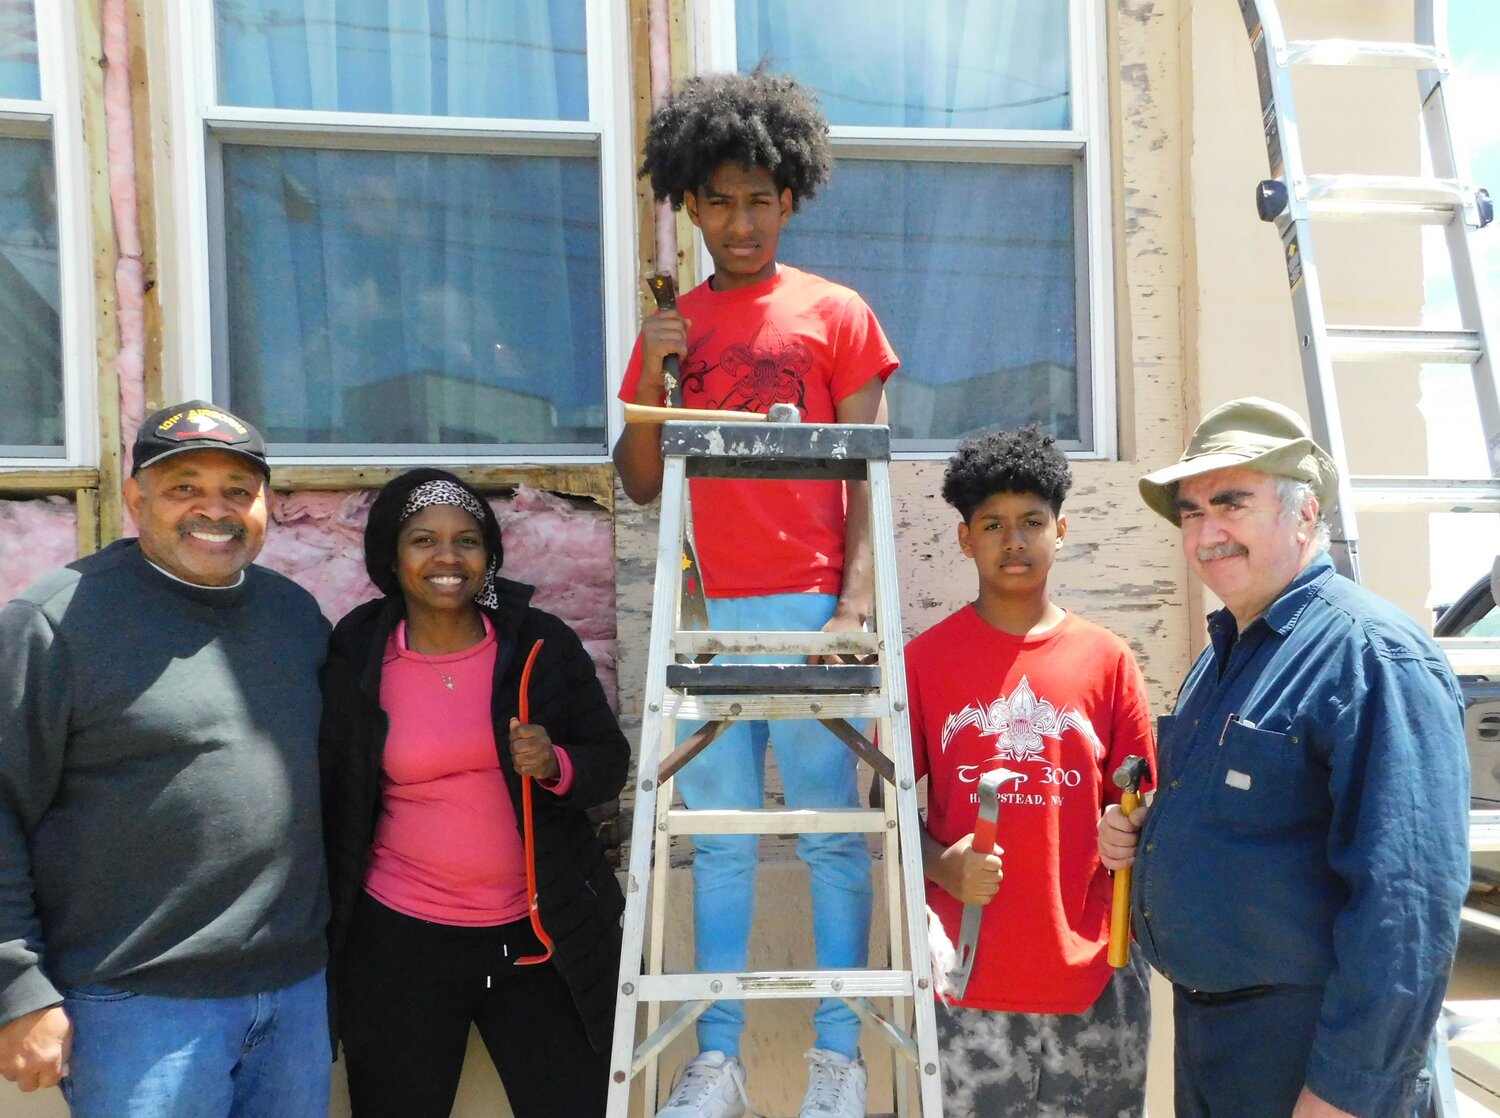 William Clinton Story American Legion Post 342 Commander Coy Richardson, left, Renaye Soto and her sons Jeremiah (Eagle Scout candidate) and Joshua Soto of BSA Troop 300, and BSA troop mentor Charlie Hart are refacing the Post 342 headquarters.